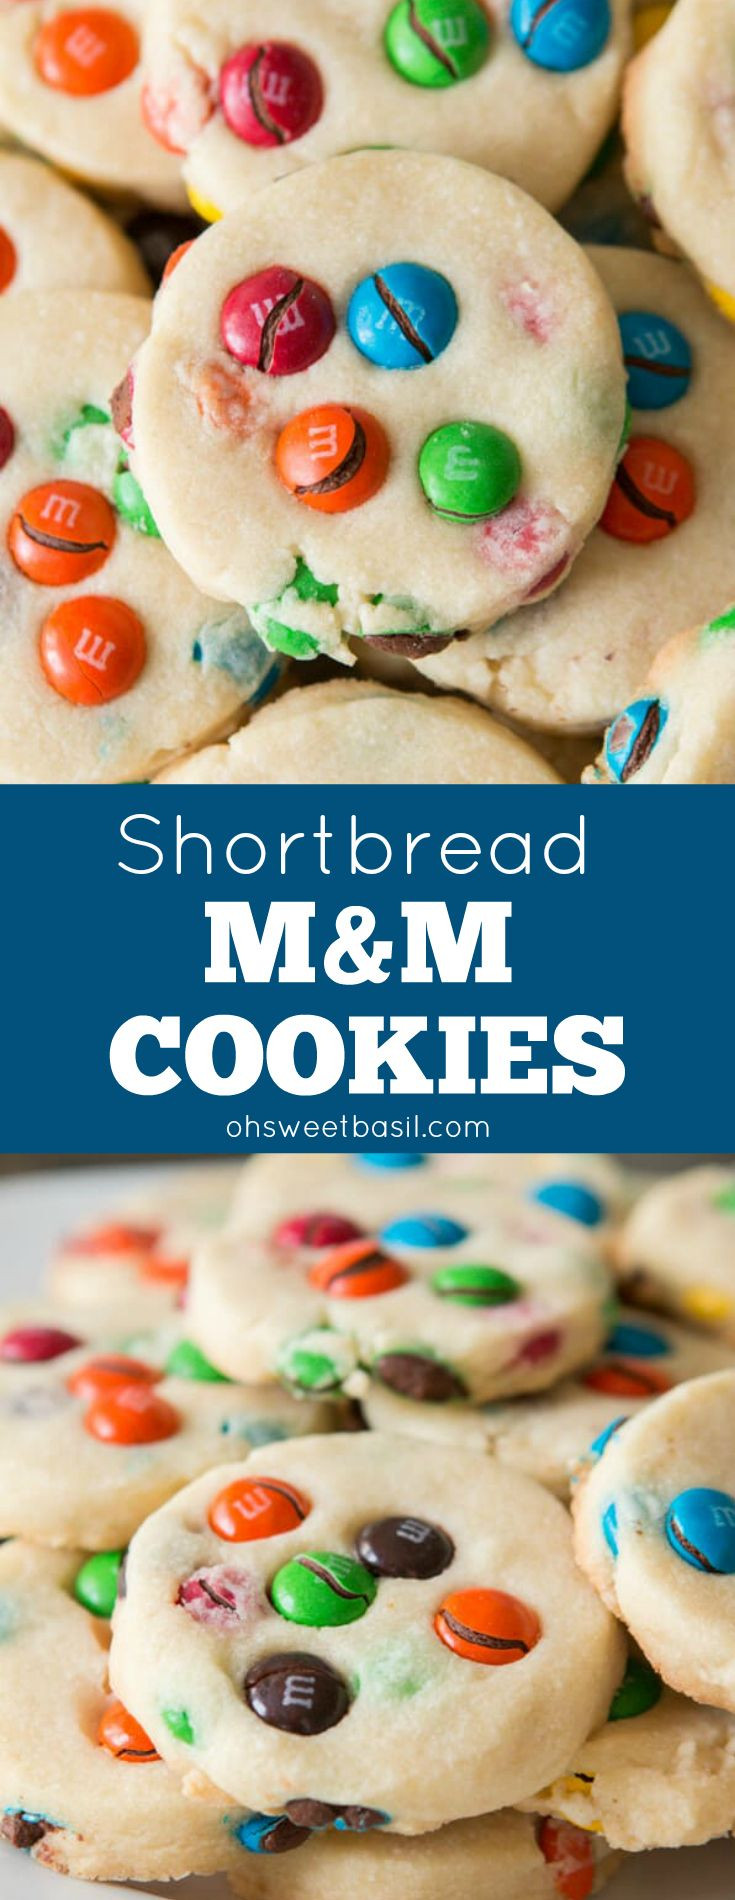 M&amp;M Christmas Cookies Recipe
 Buttery shortbread m&m cookies We love making these